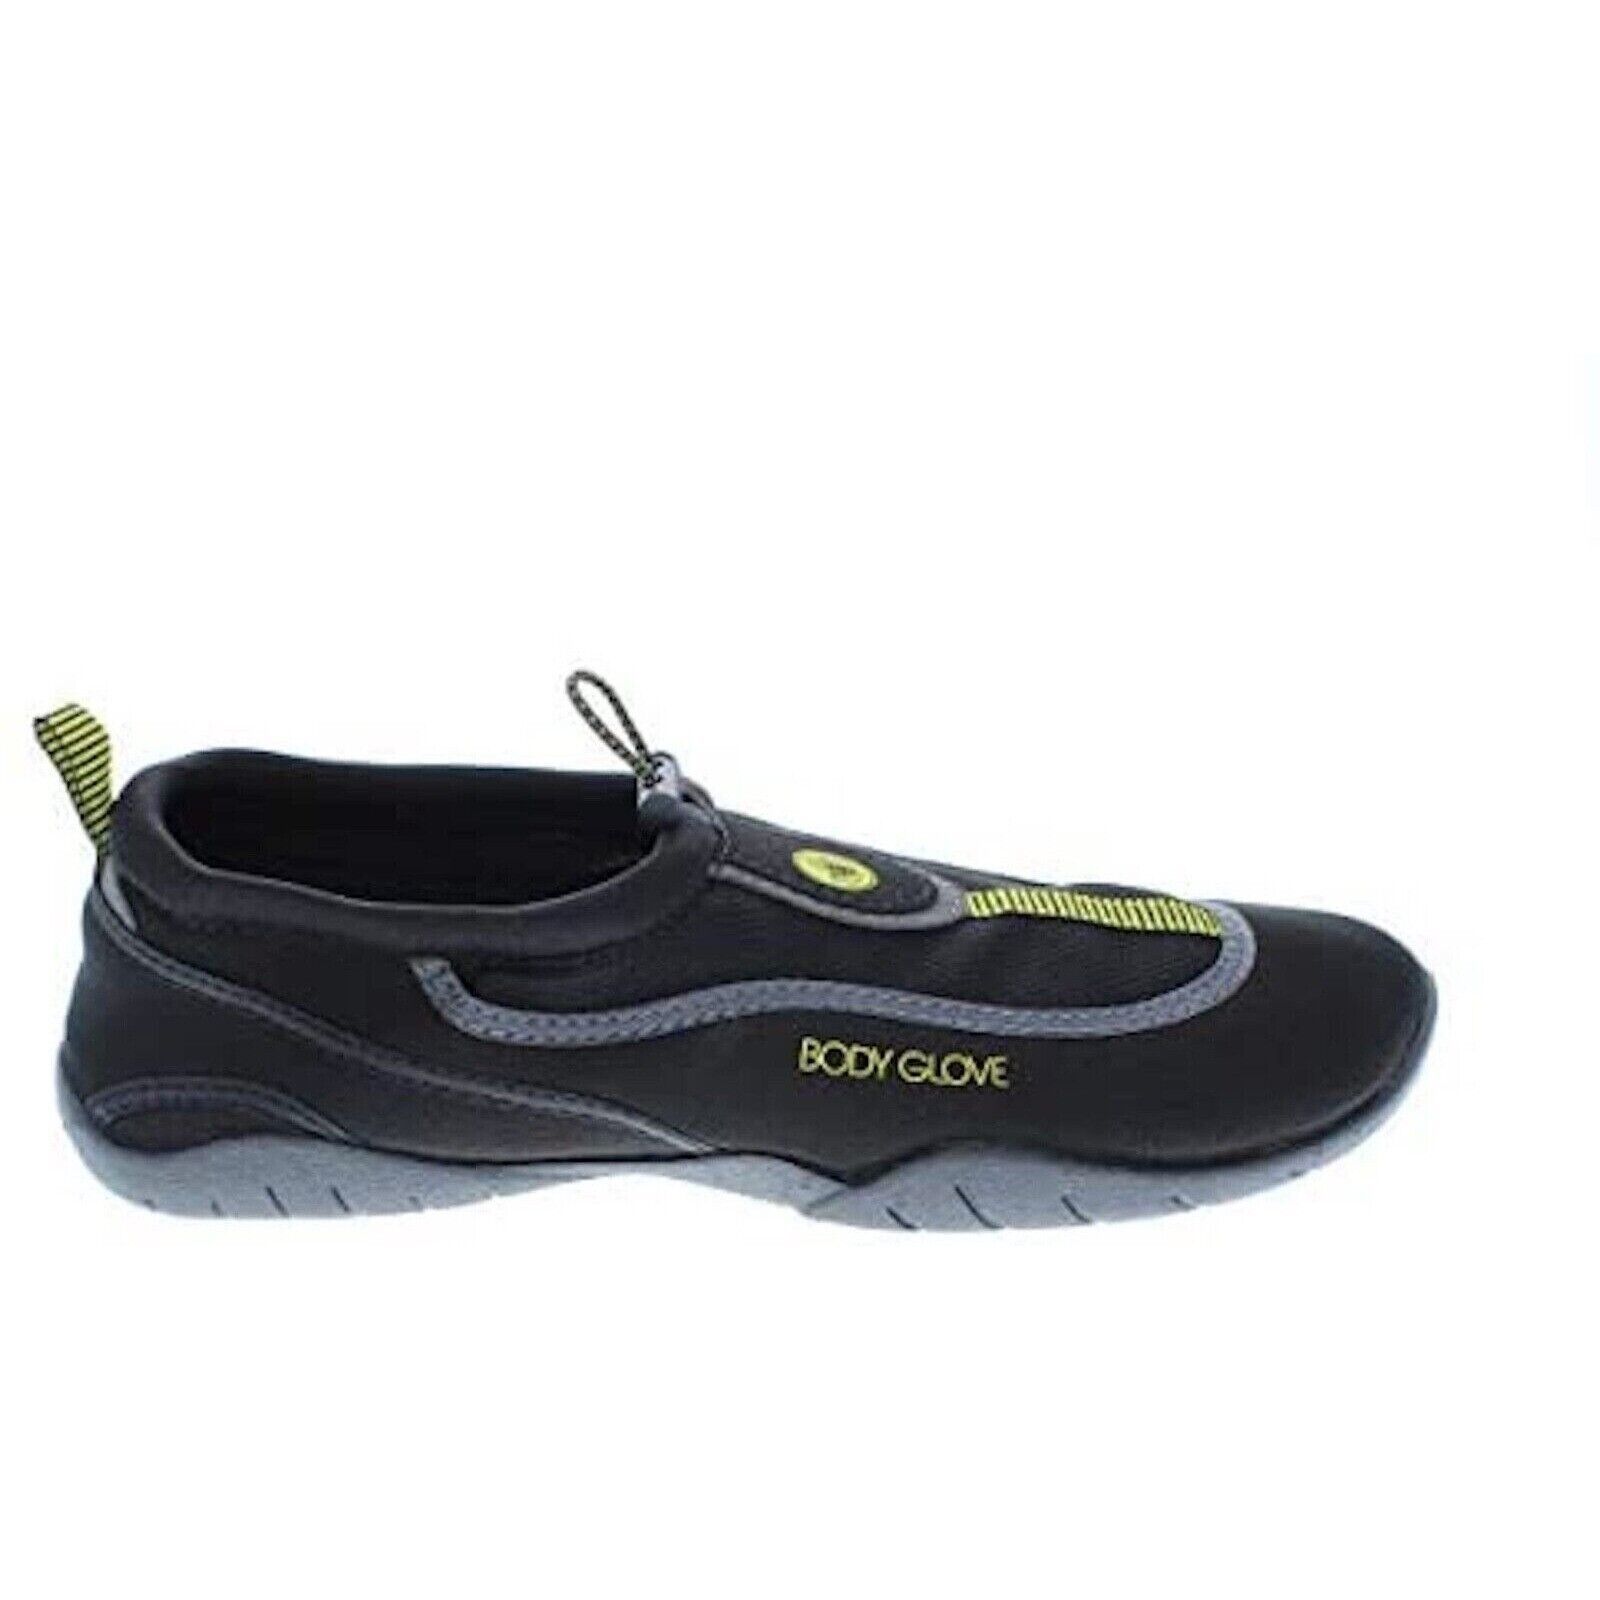 Primary image for BODY GLOVE RIPTIDE III WATER AQUA SHOES YOUTH BLACK/YELLOW SIZE: 1  NEW W/TAGS